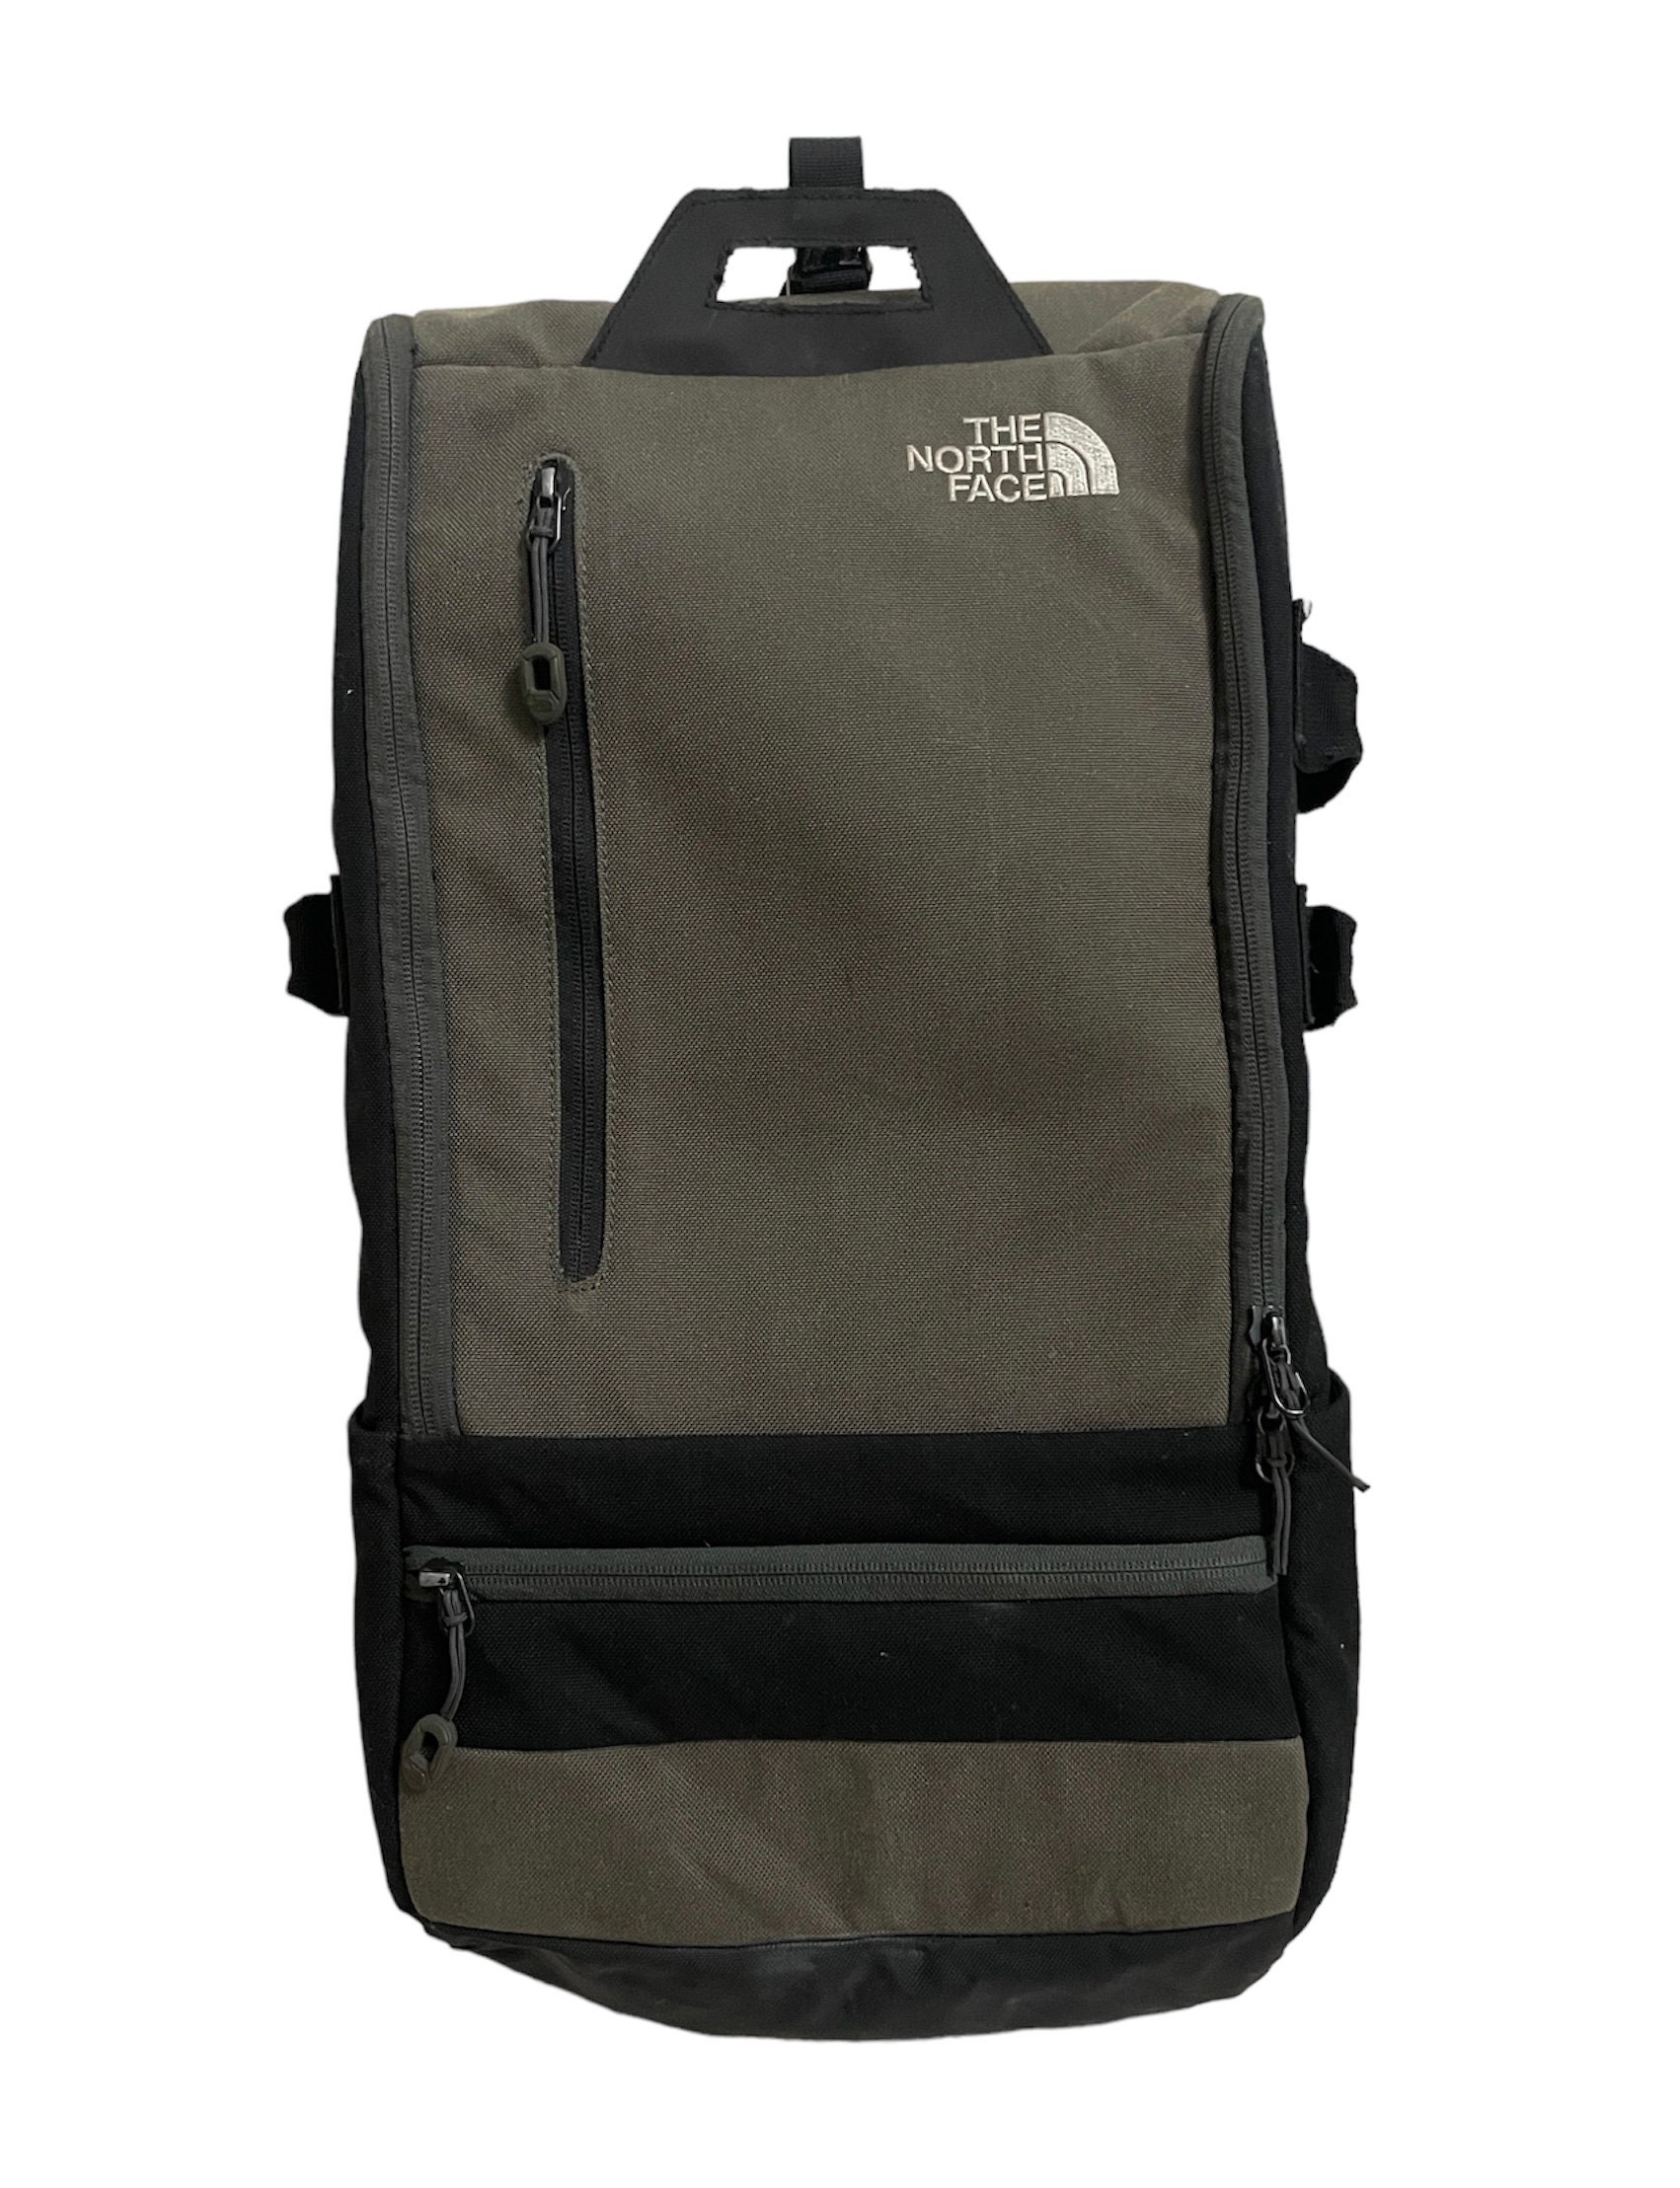 The North Face Valance 29L Hiking Backpack -  Singapore